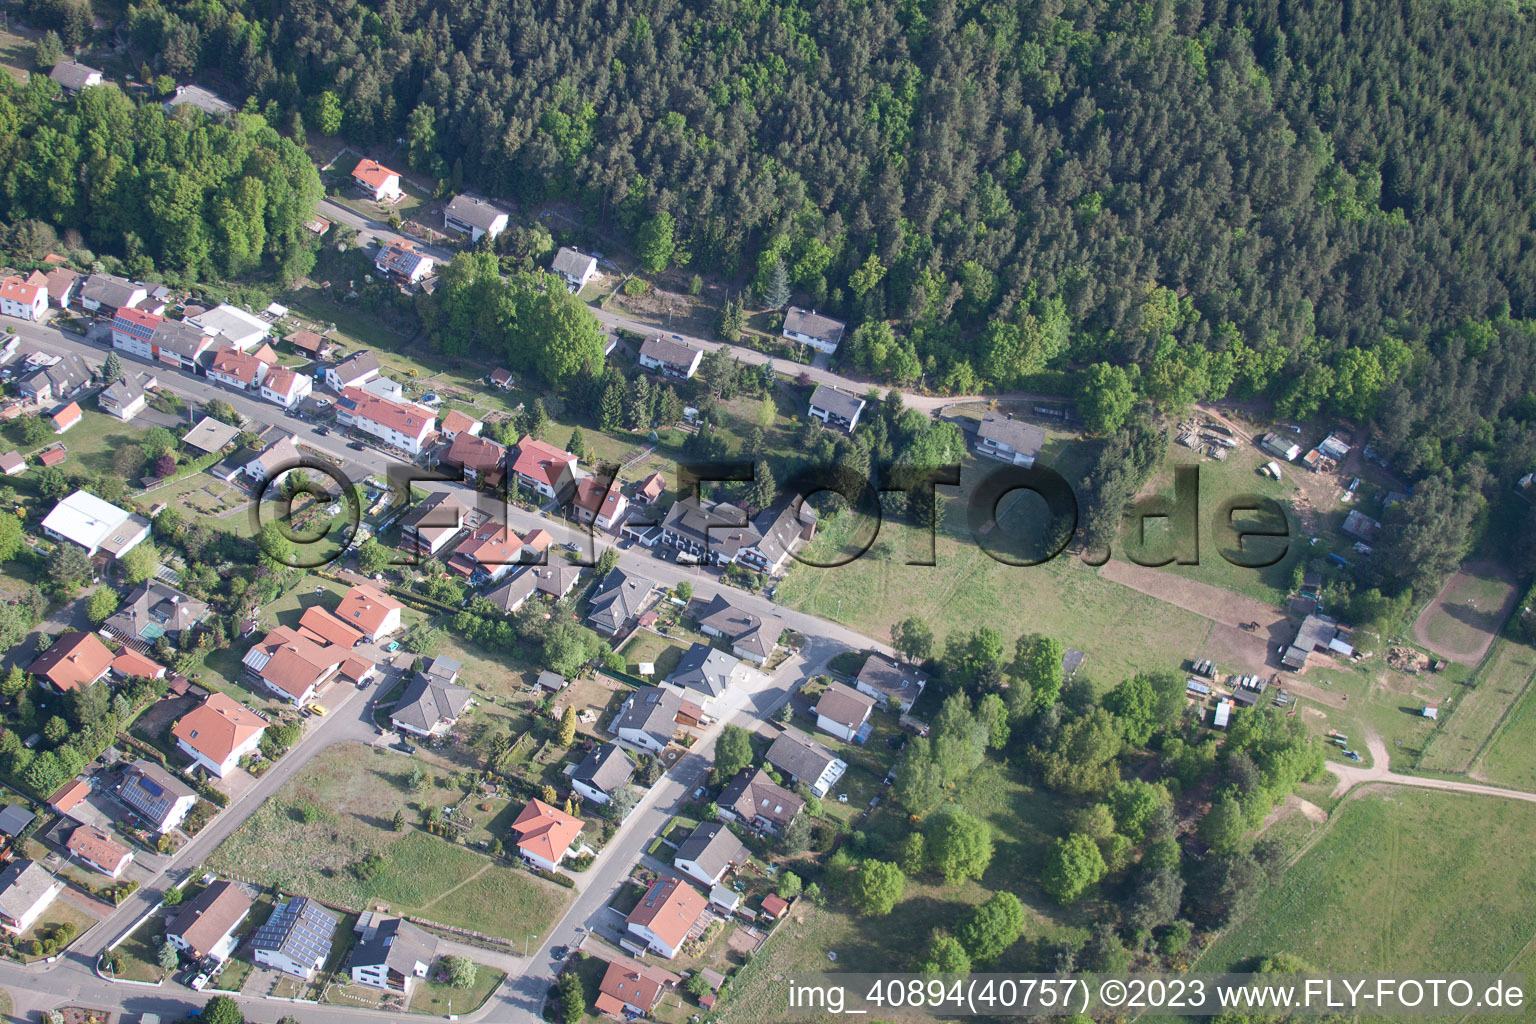 Aerial photograpy of Lower Haardtstrasse 57 + 59 in Eppenbrunn in the state Rhineland-Palatinate, Germany